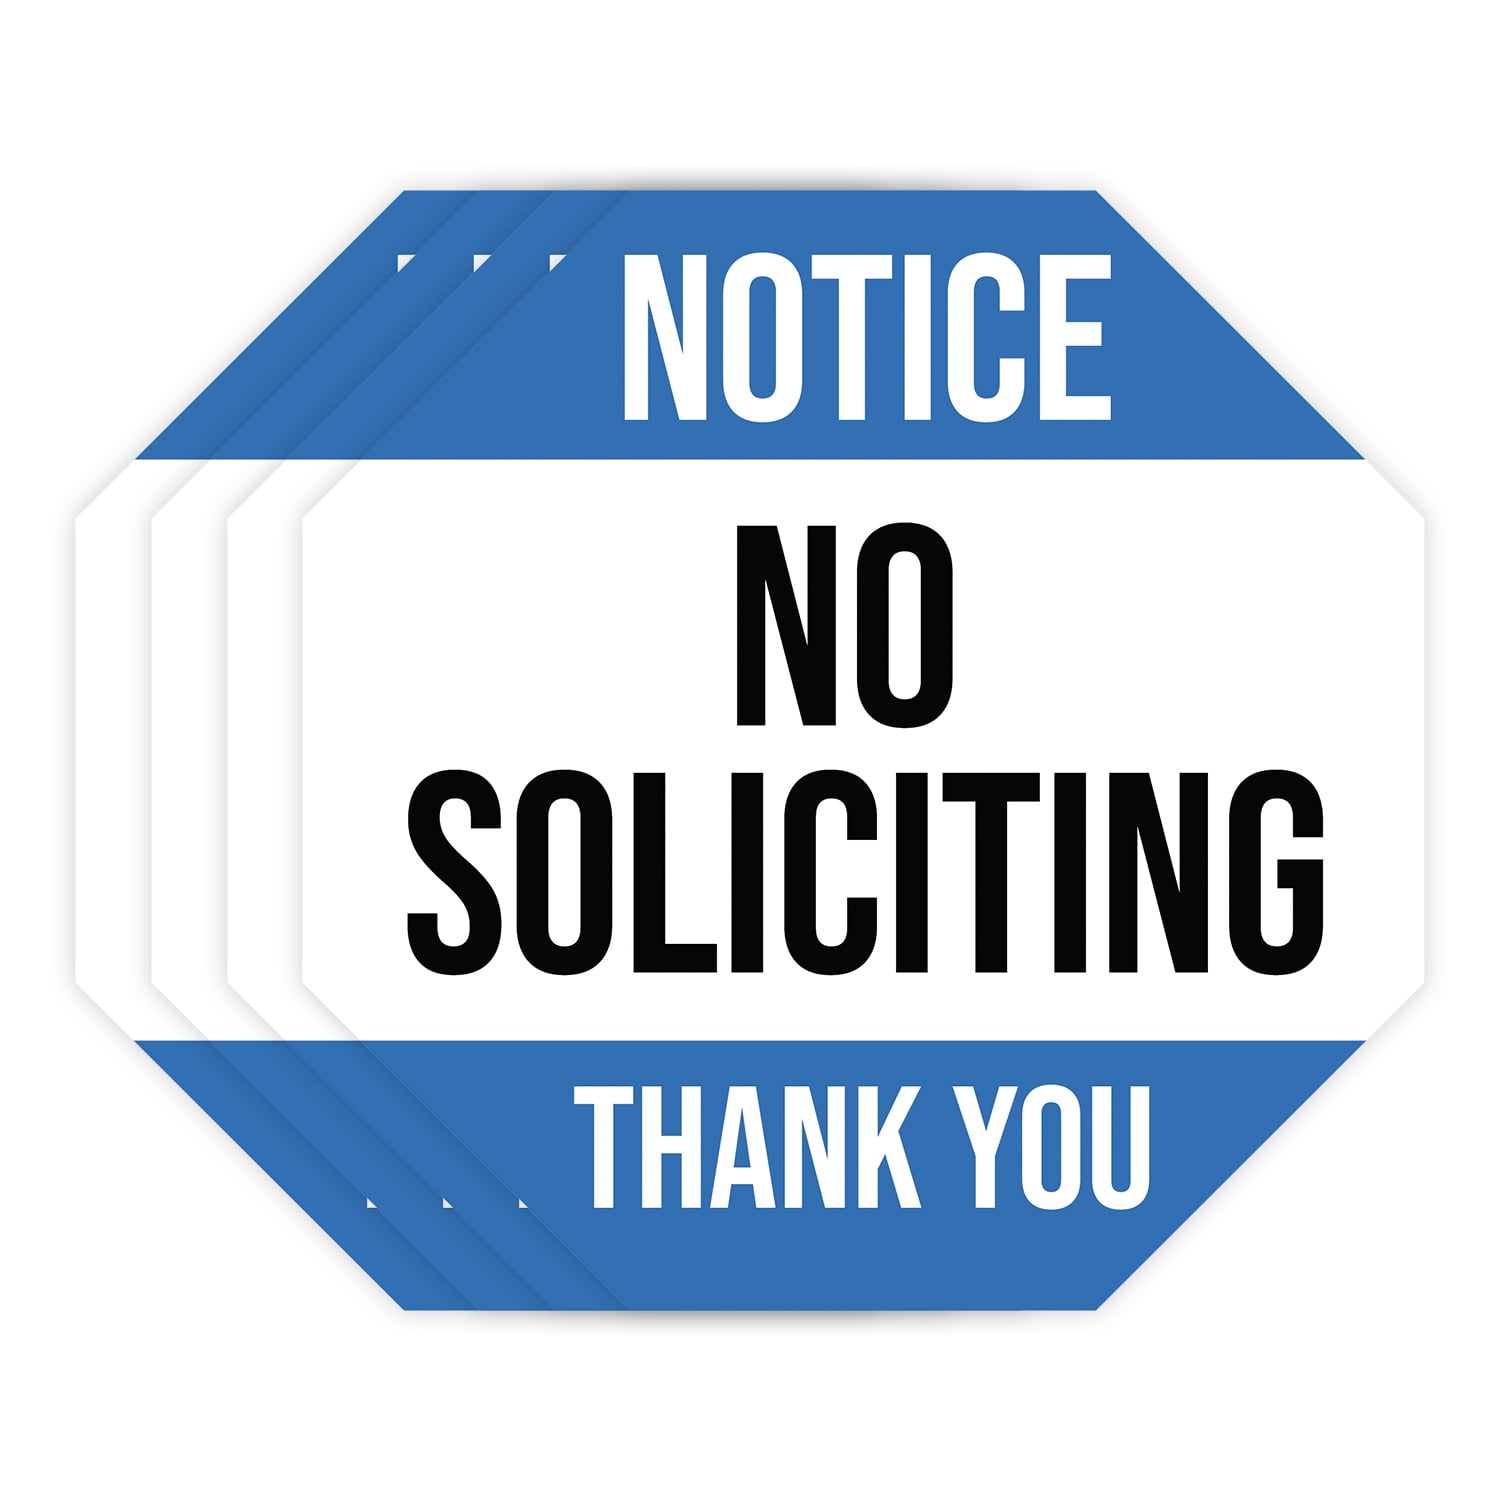 Works on Glass Metal or Any Smooth Surface 8 x 2 inches Perfect for House Home Office or Business No Soliciting Sign Peel and Stick Decal Sticker for Door or Window | Deter Door to Door Sales